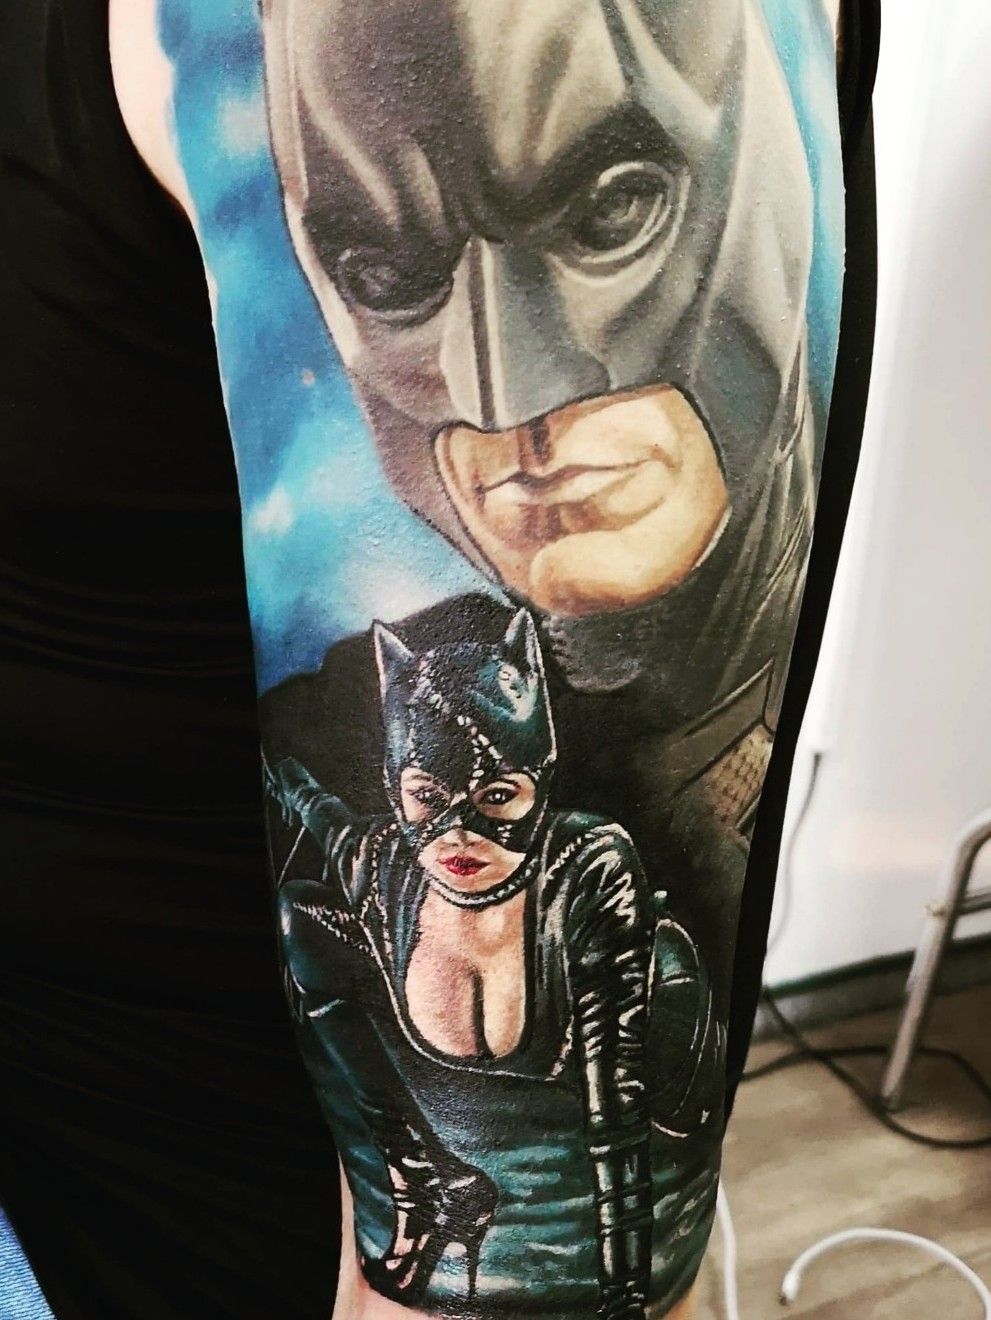 Darklab Tattoo Supplies  Epic Batman and Catwoman piece courtesy of  fkironsproteam artist SandraDaukshtaTattoo The heart wants what the  heart wants       fkirons darklab darklabsupplies fkironsxion  tattooed 